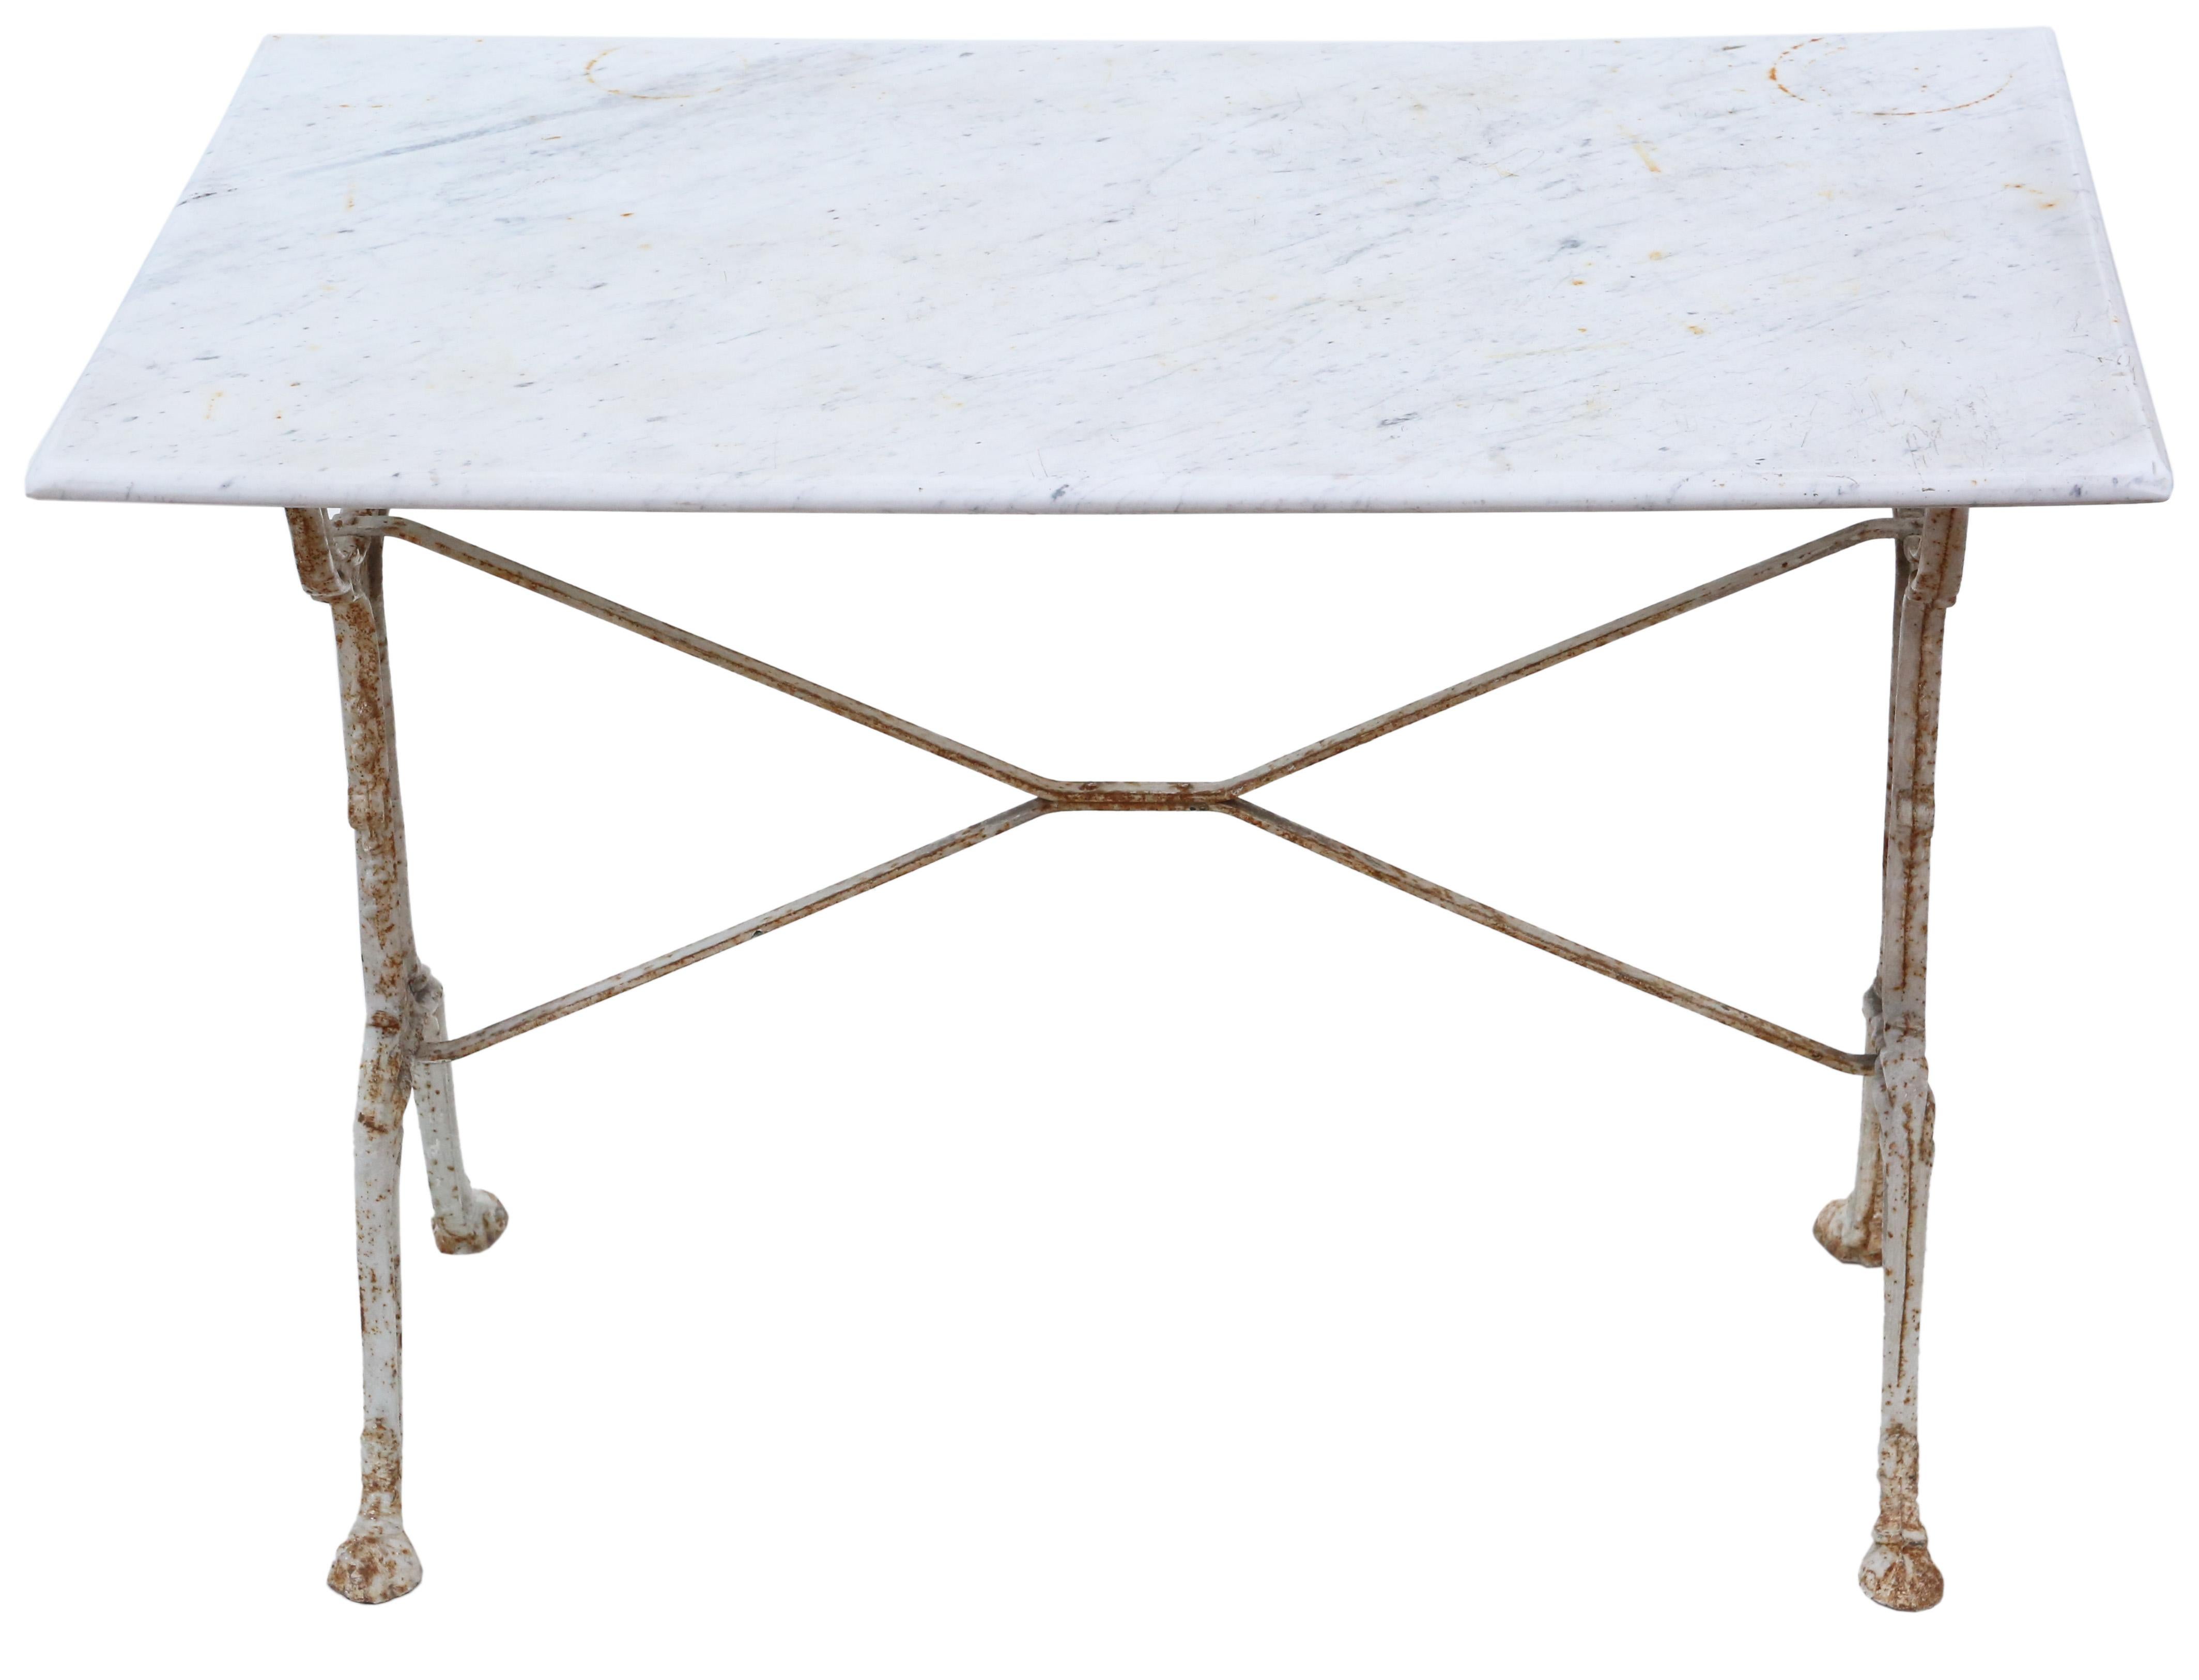 Presenting an exquisite 19th Century patisserie bistro kitchen garden dining table, adorned with the timeless elegance of marble and cast iron. This antique gem features a distressed white-painted base, showcasing the charming allure of age, while